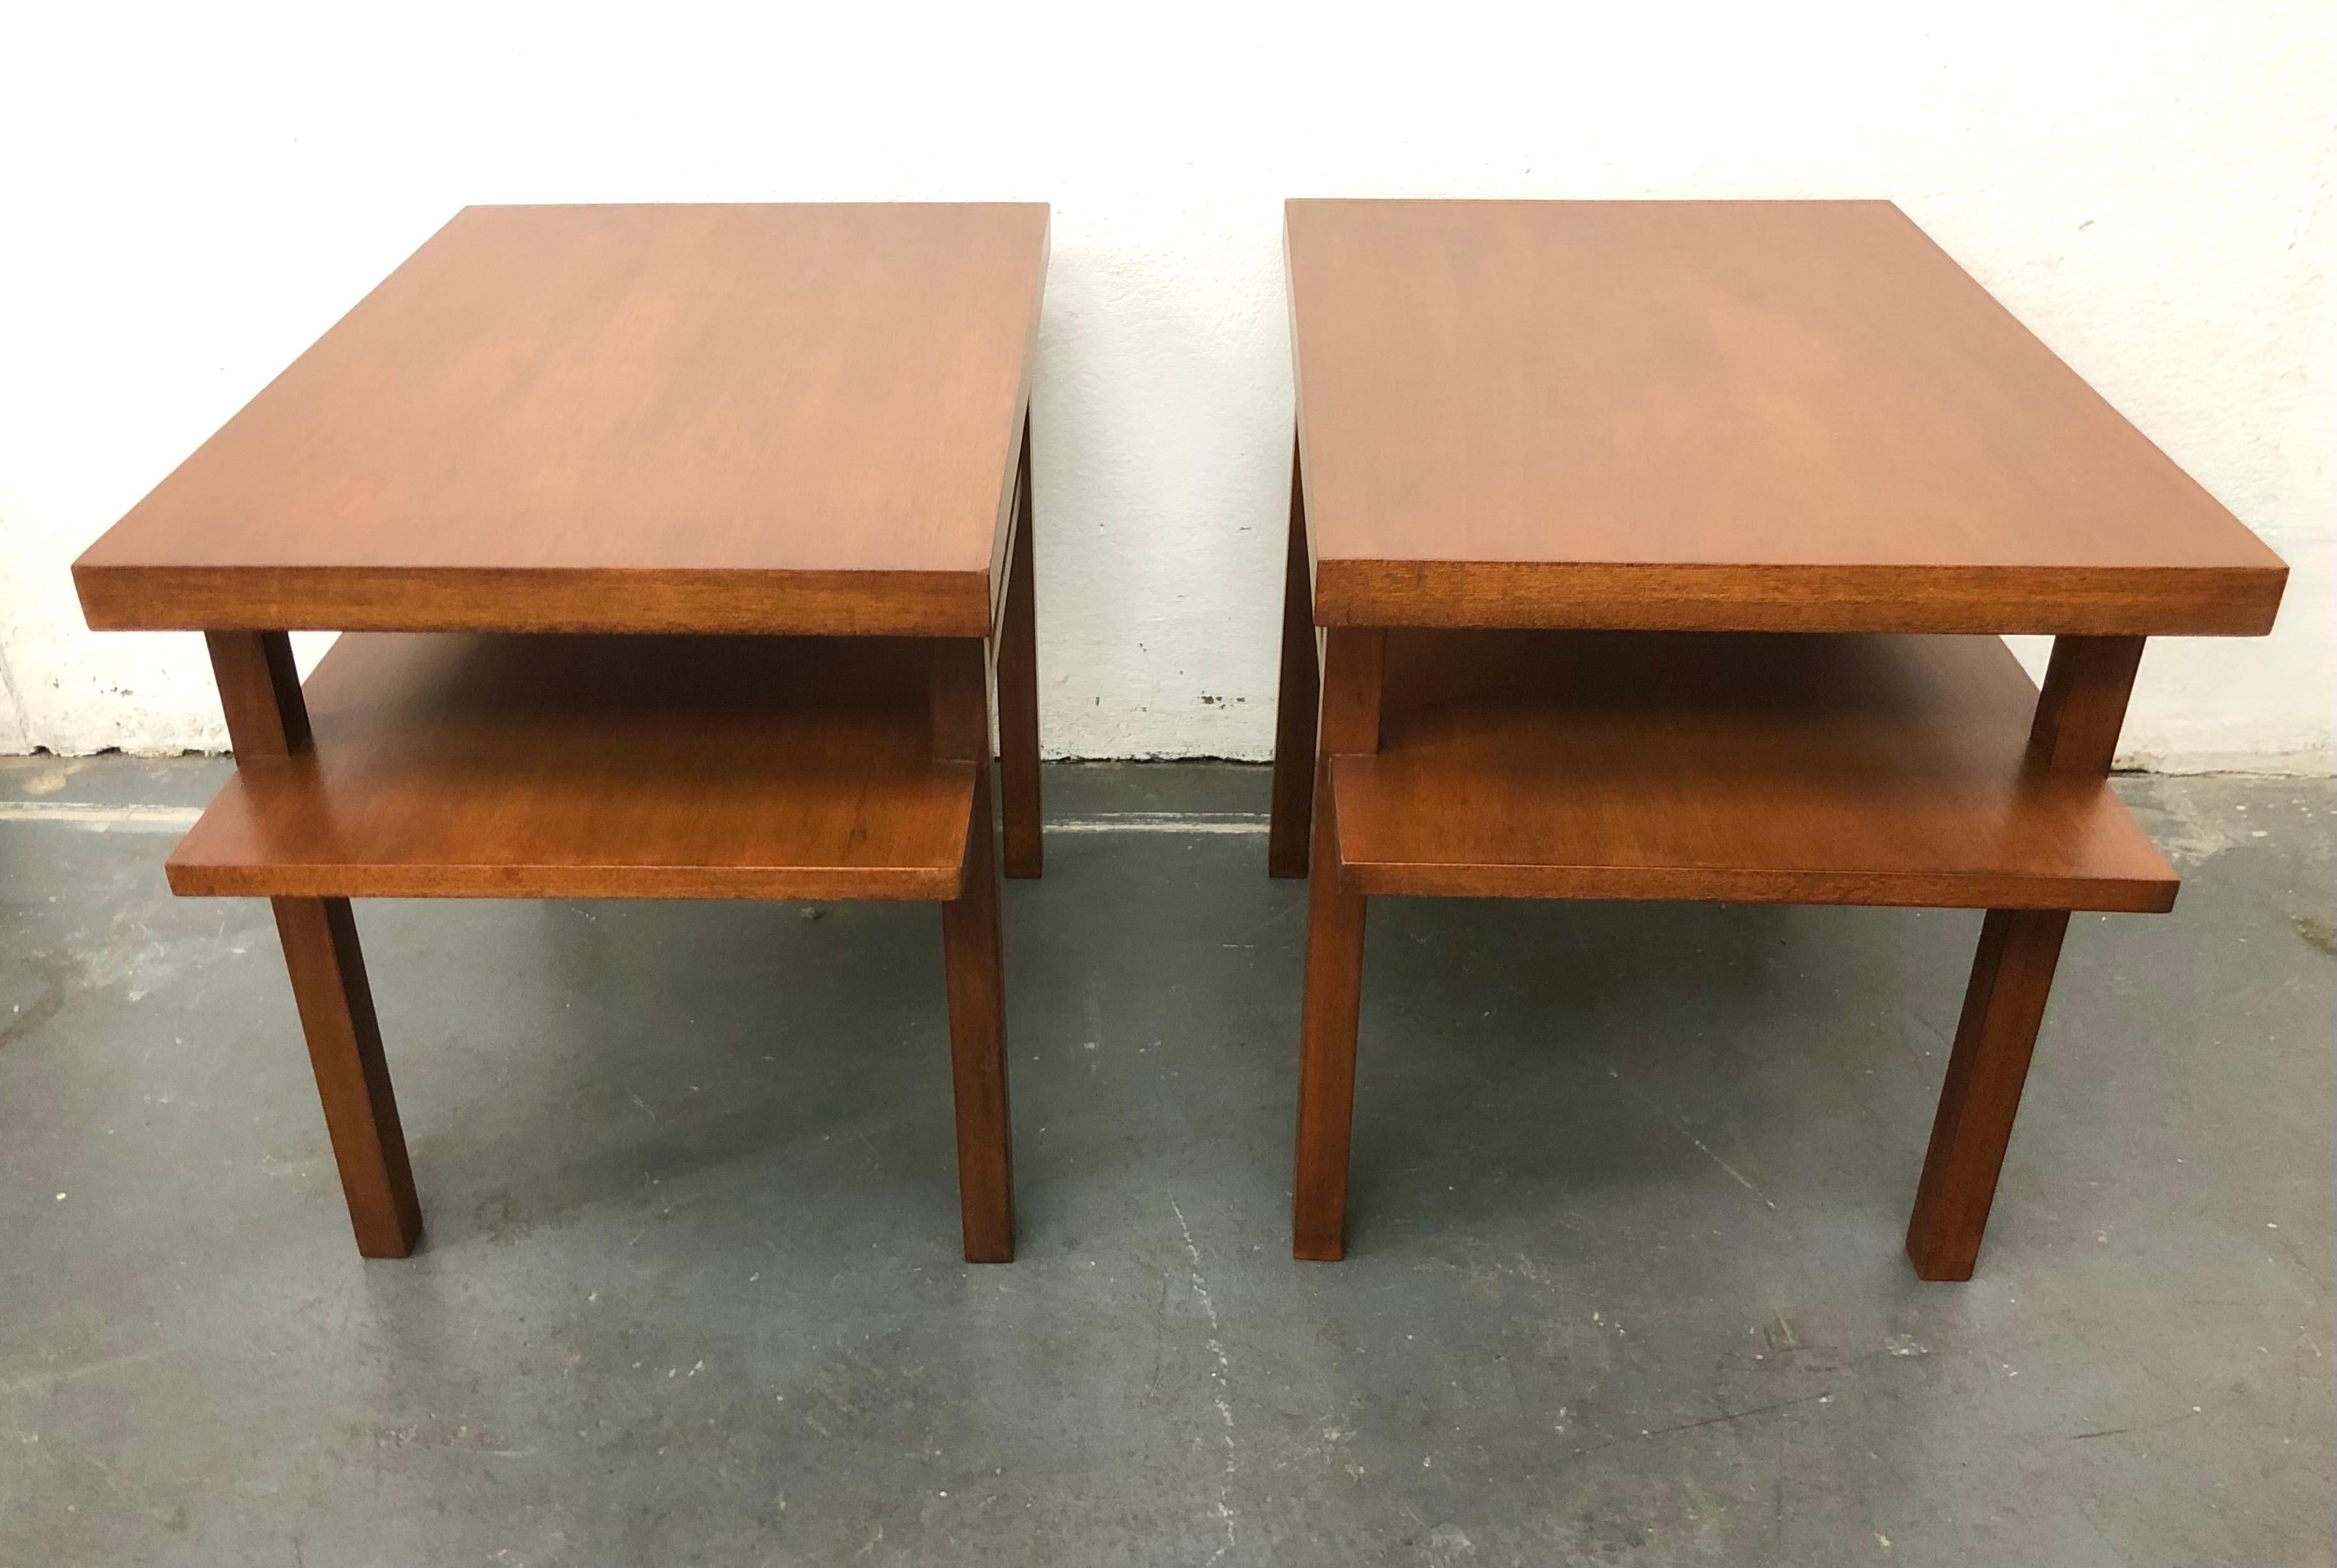 An early architectural Gibbings design, c. 1940s, in mahogany. The slightly elongated bottom shelf disrupts the overriding simplicity. Widdicomb labels.

Table tops are 28